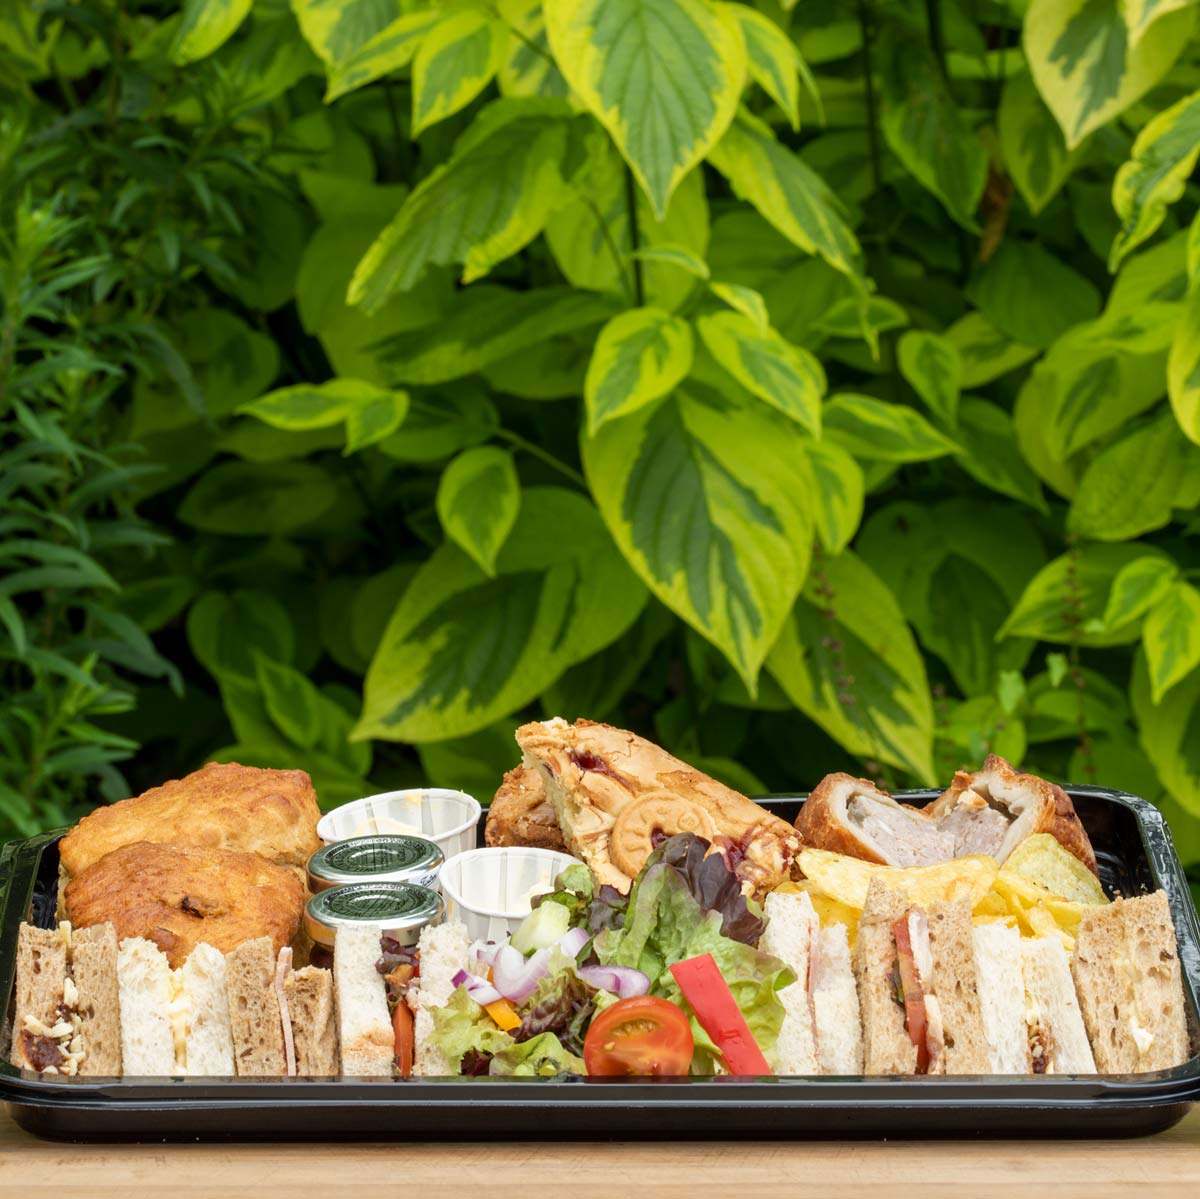 Takeaway Afternoon GTea from the Helenium Tearoom at Barnsdale Gardens